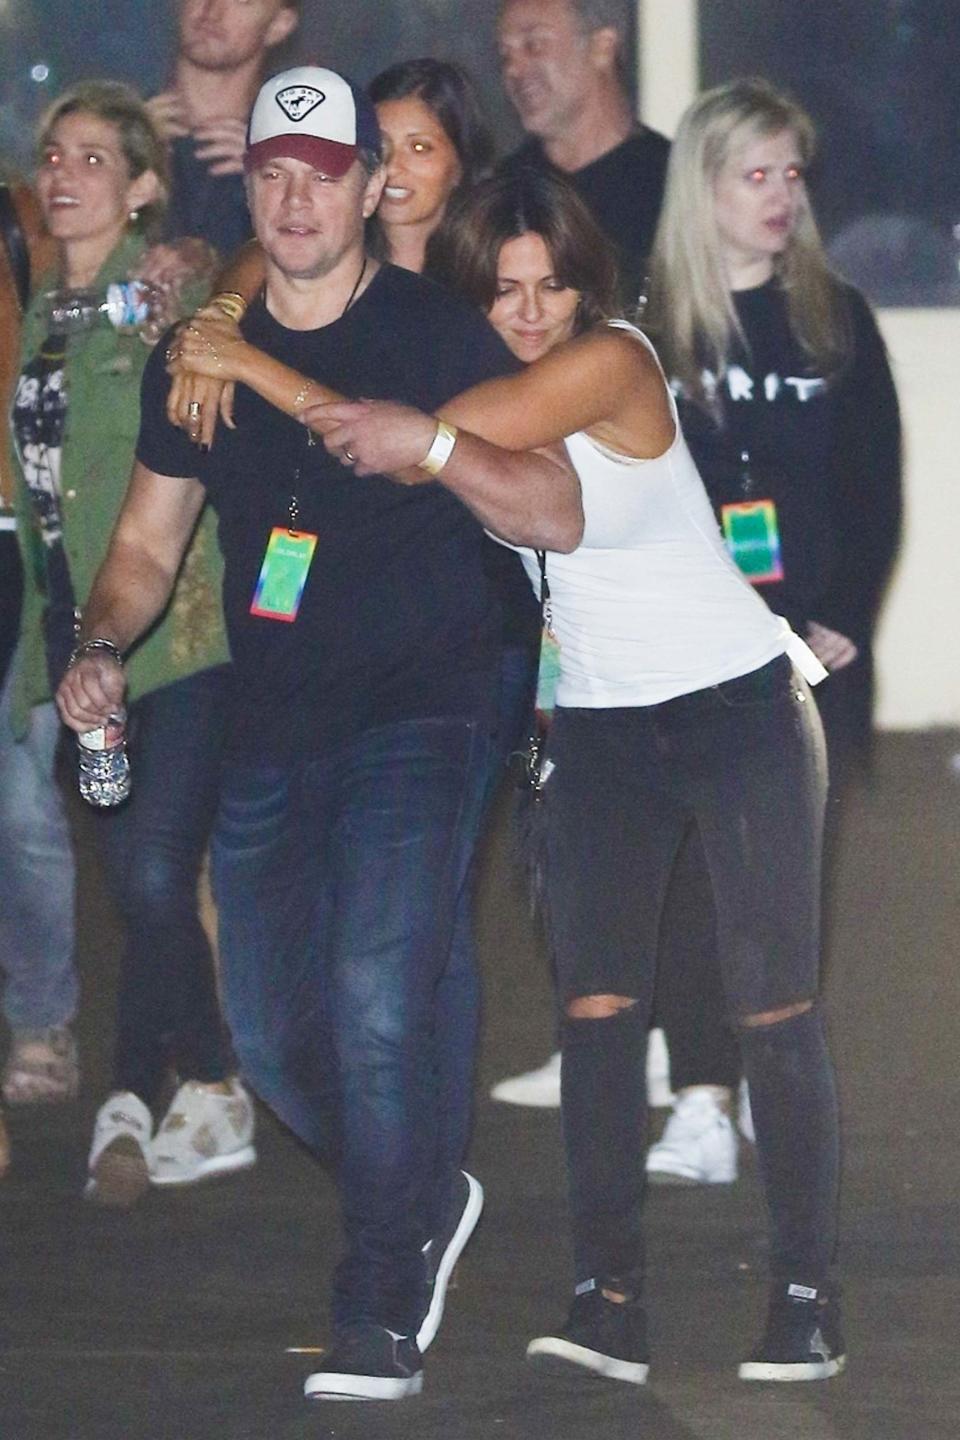 The cute couple couldn't keep their hands off each other at a Coldplay concert over the weekend.